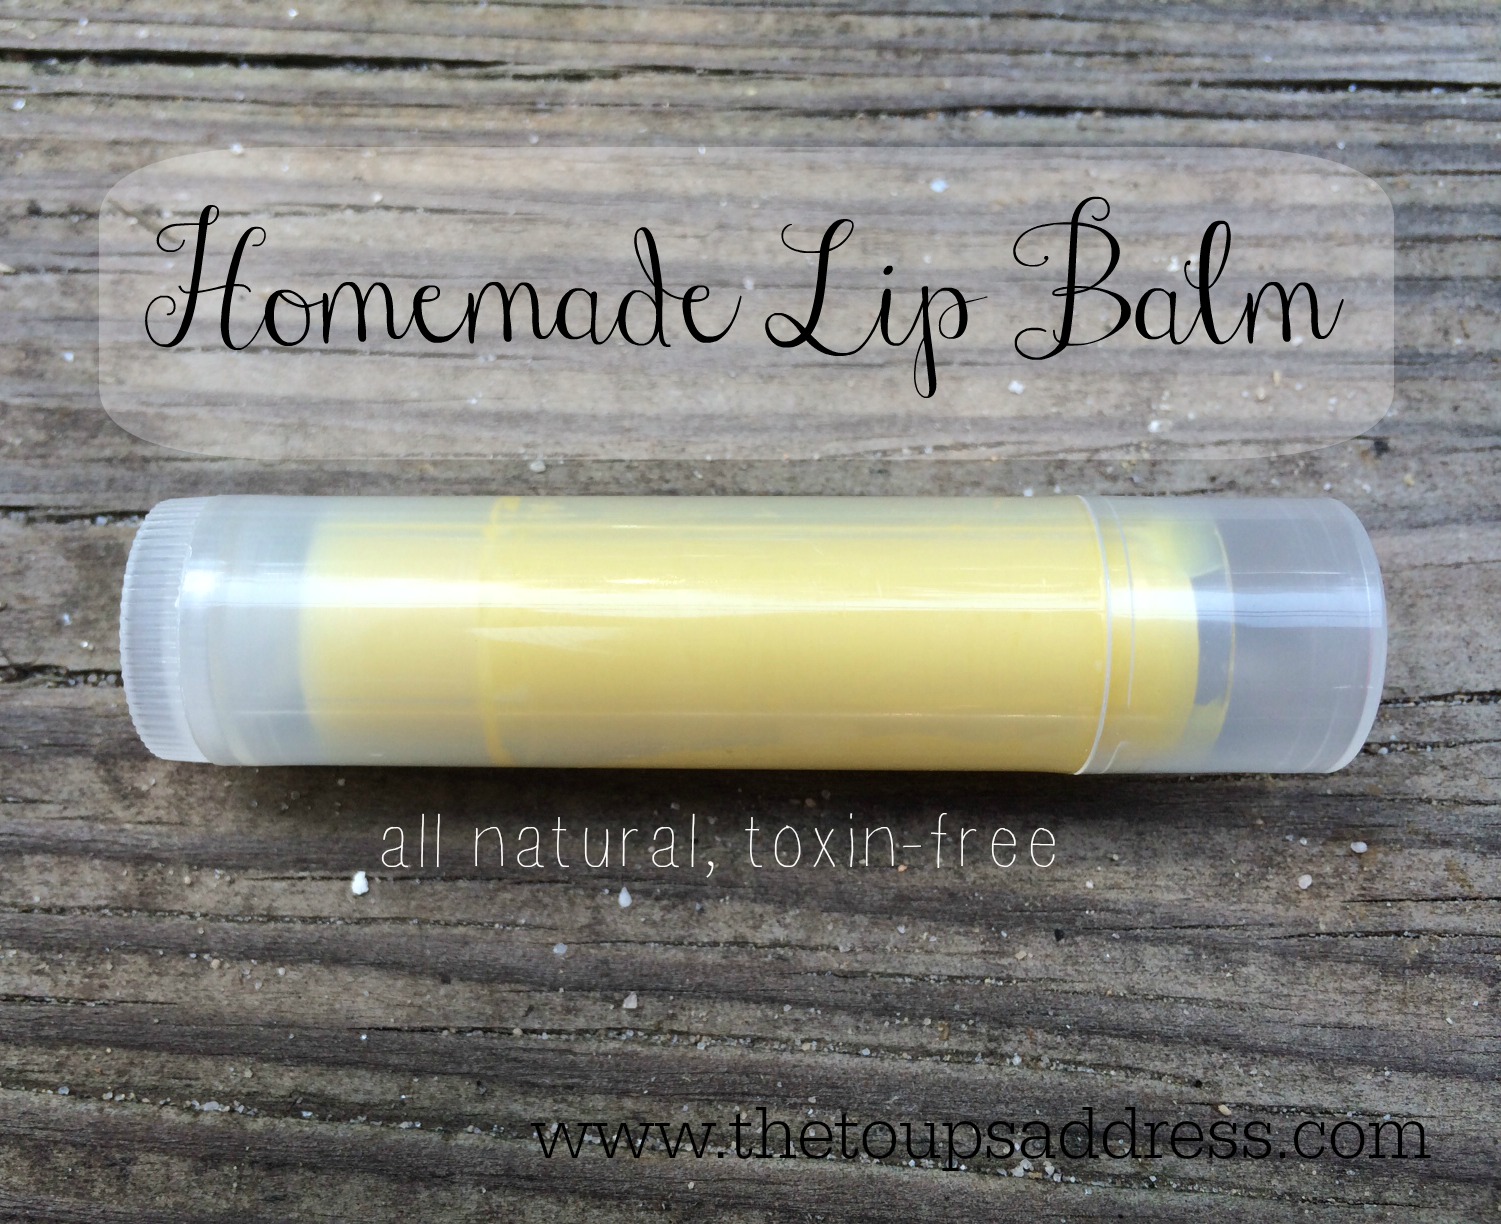 Make your own natural toxin-free lip balm!